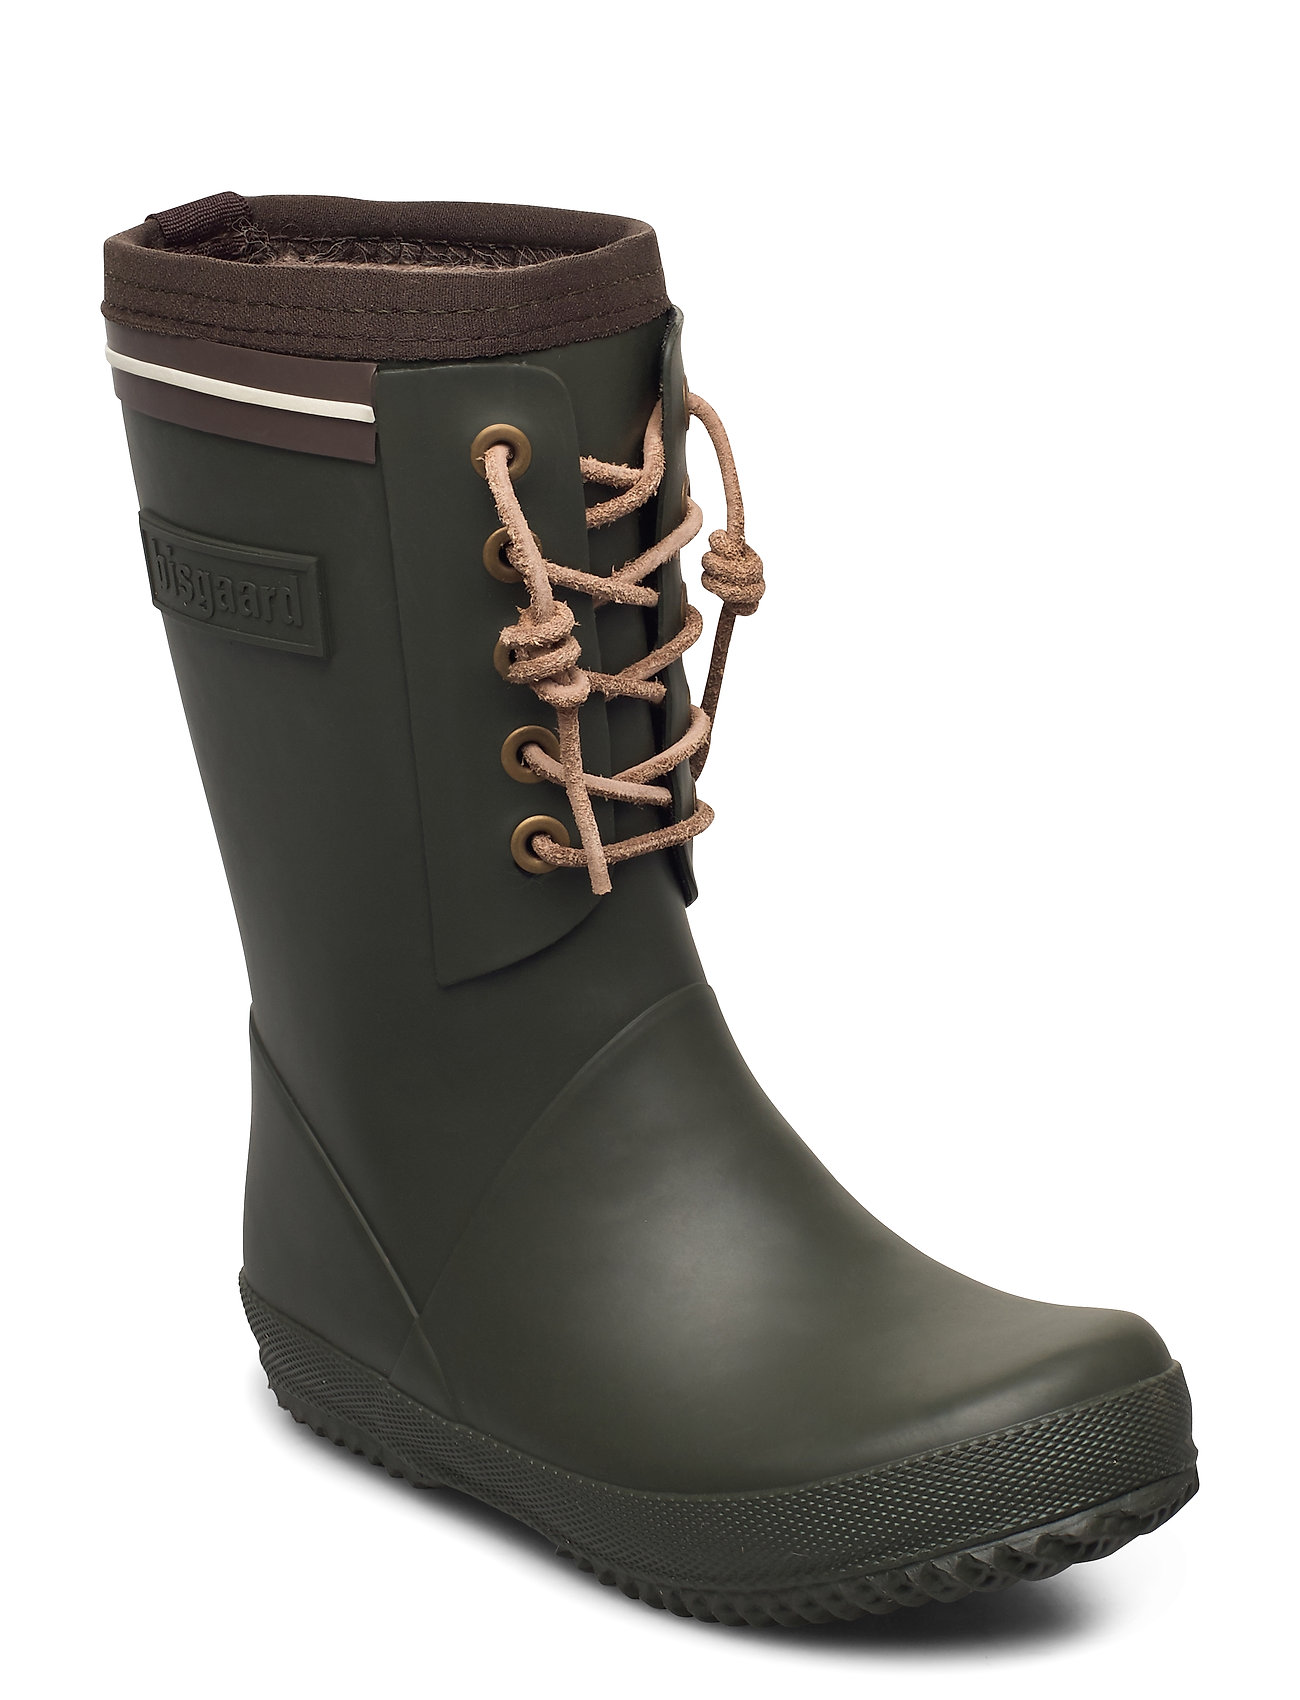 Bisgaard Lace Thermo Shoes Rubberboots Lined Rubberboots Vihreä Bisgaard